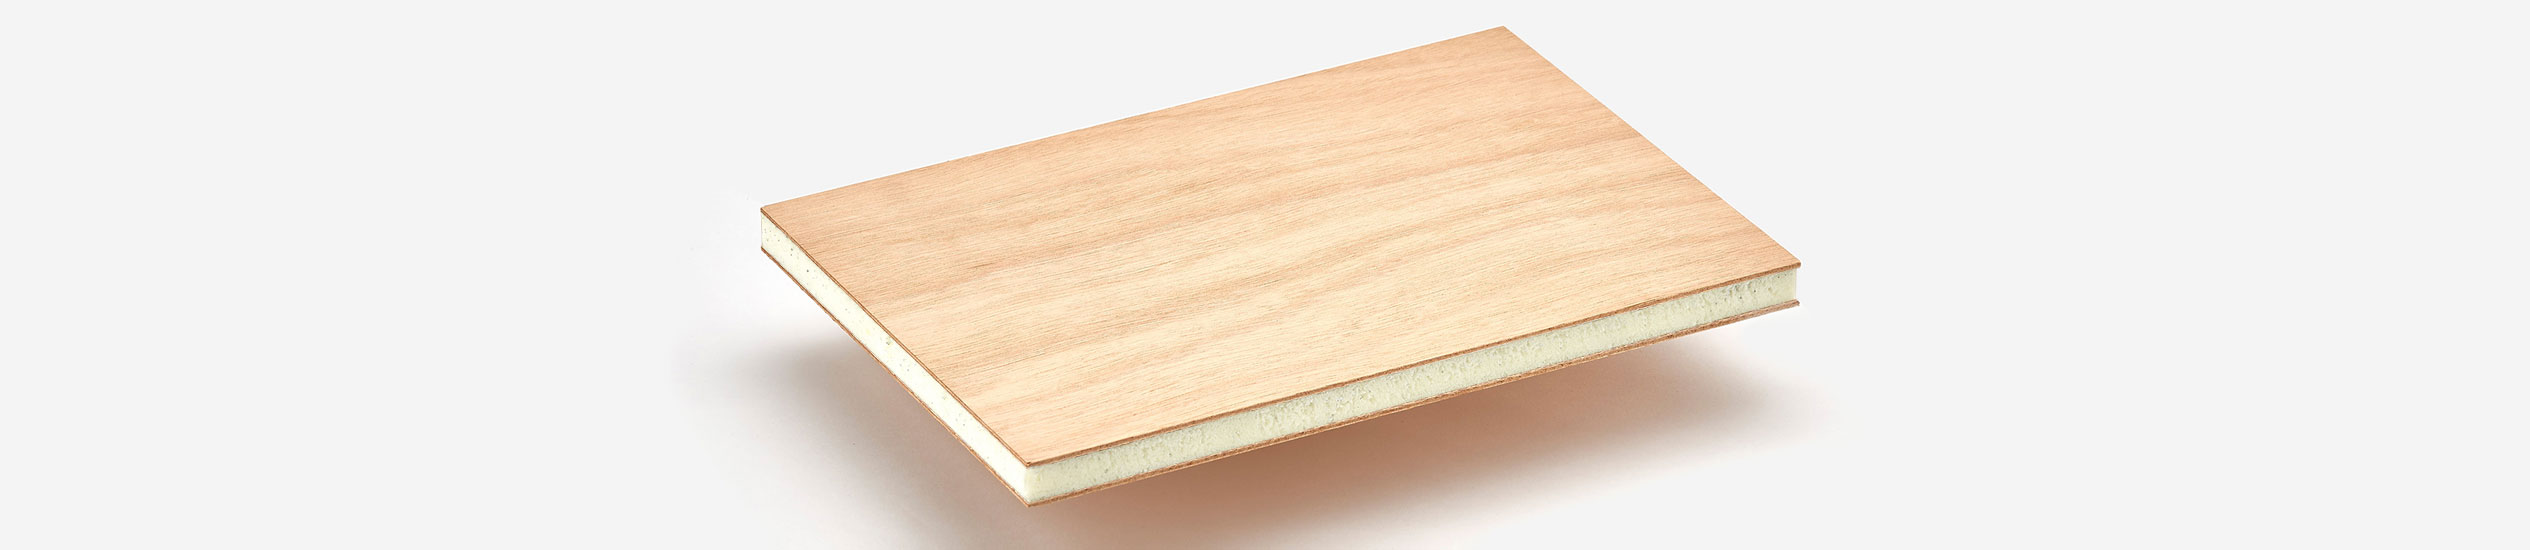 COMPOCEL-WF is a sandwich panel with a PVC foam core and skins in plywood.